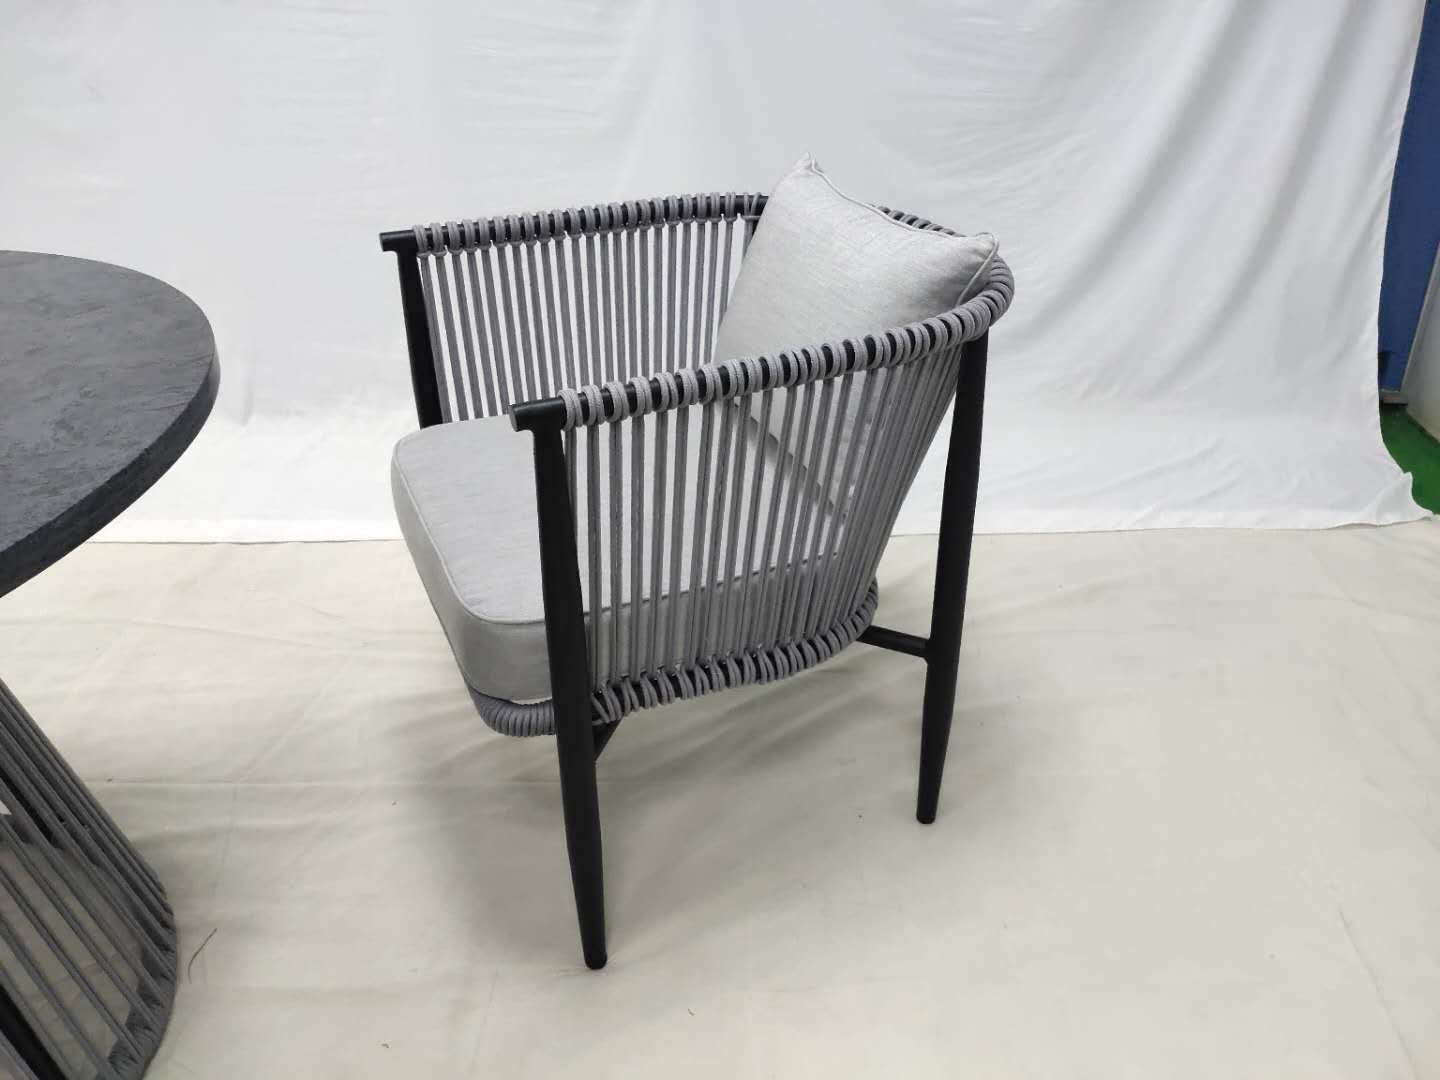 Rope gray stylish hotel outdoor chair